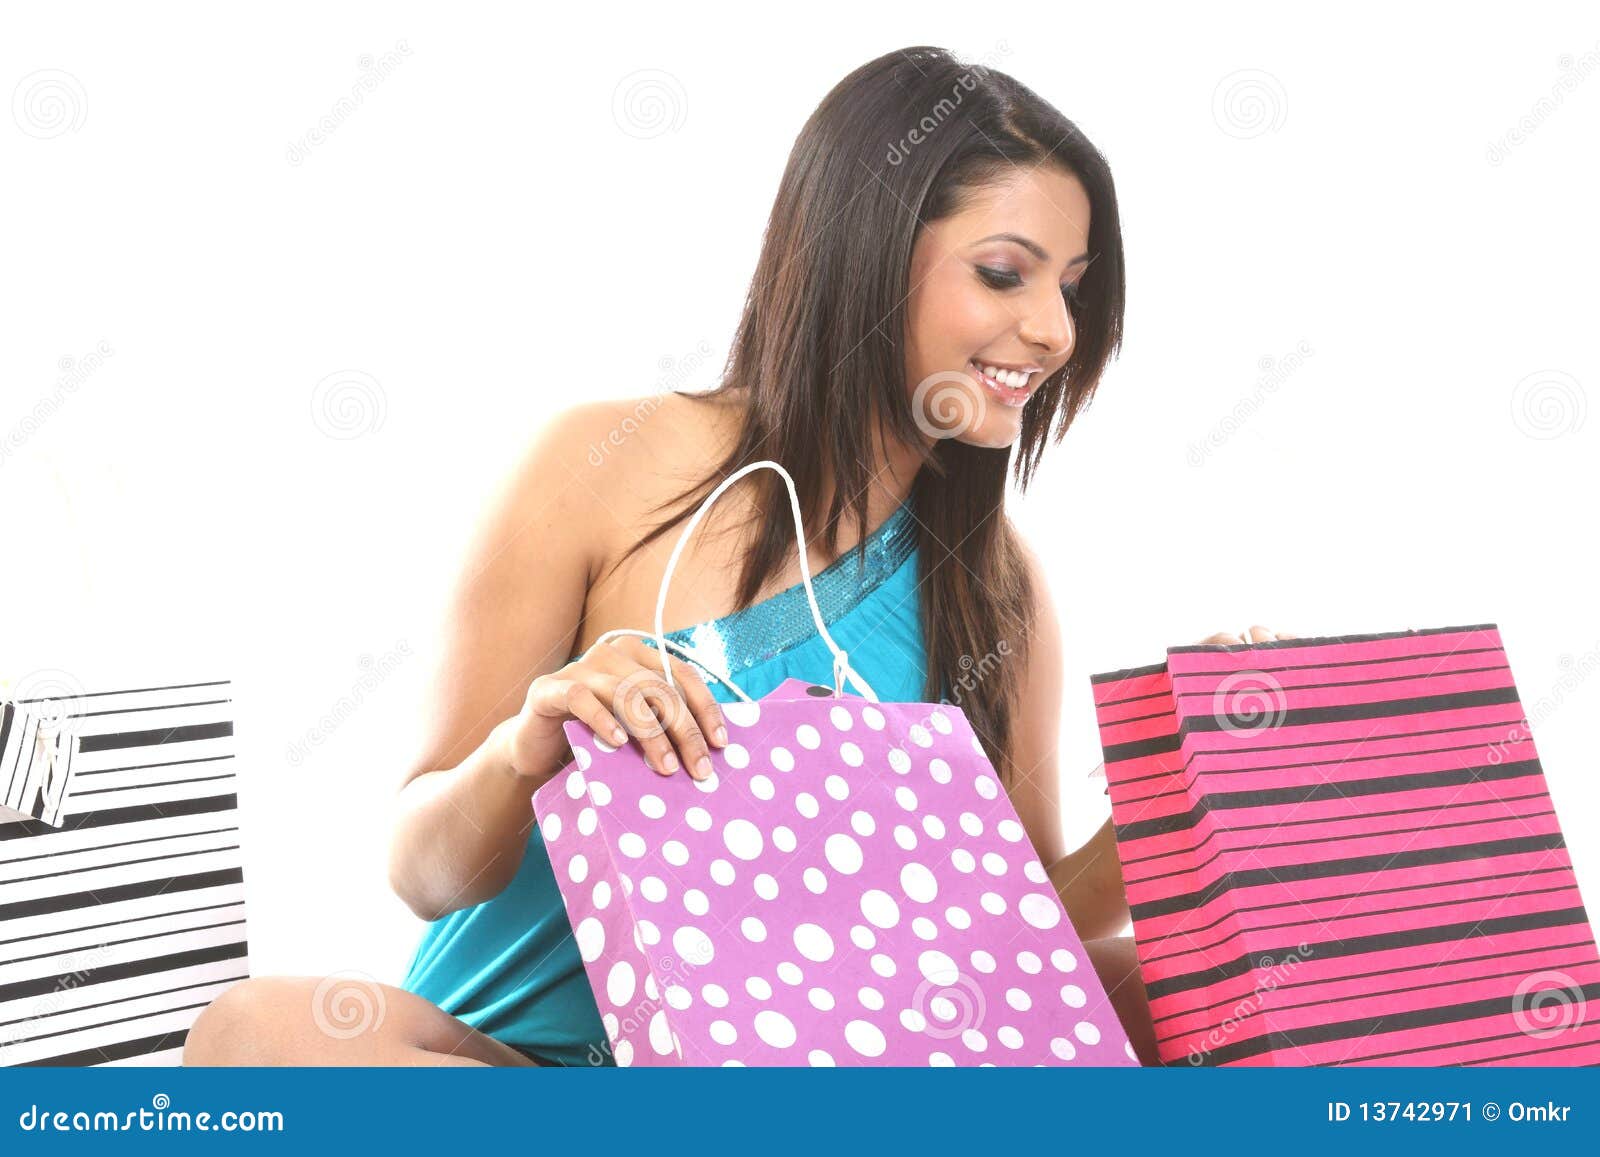 girl seeing all her shopping bags